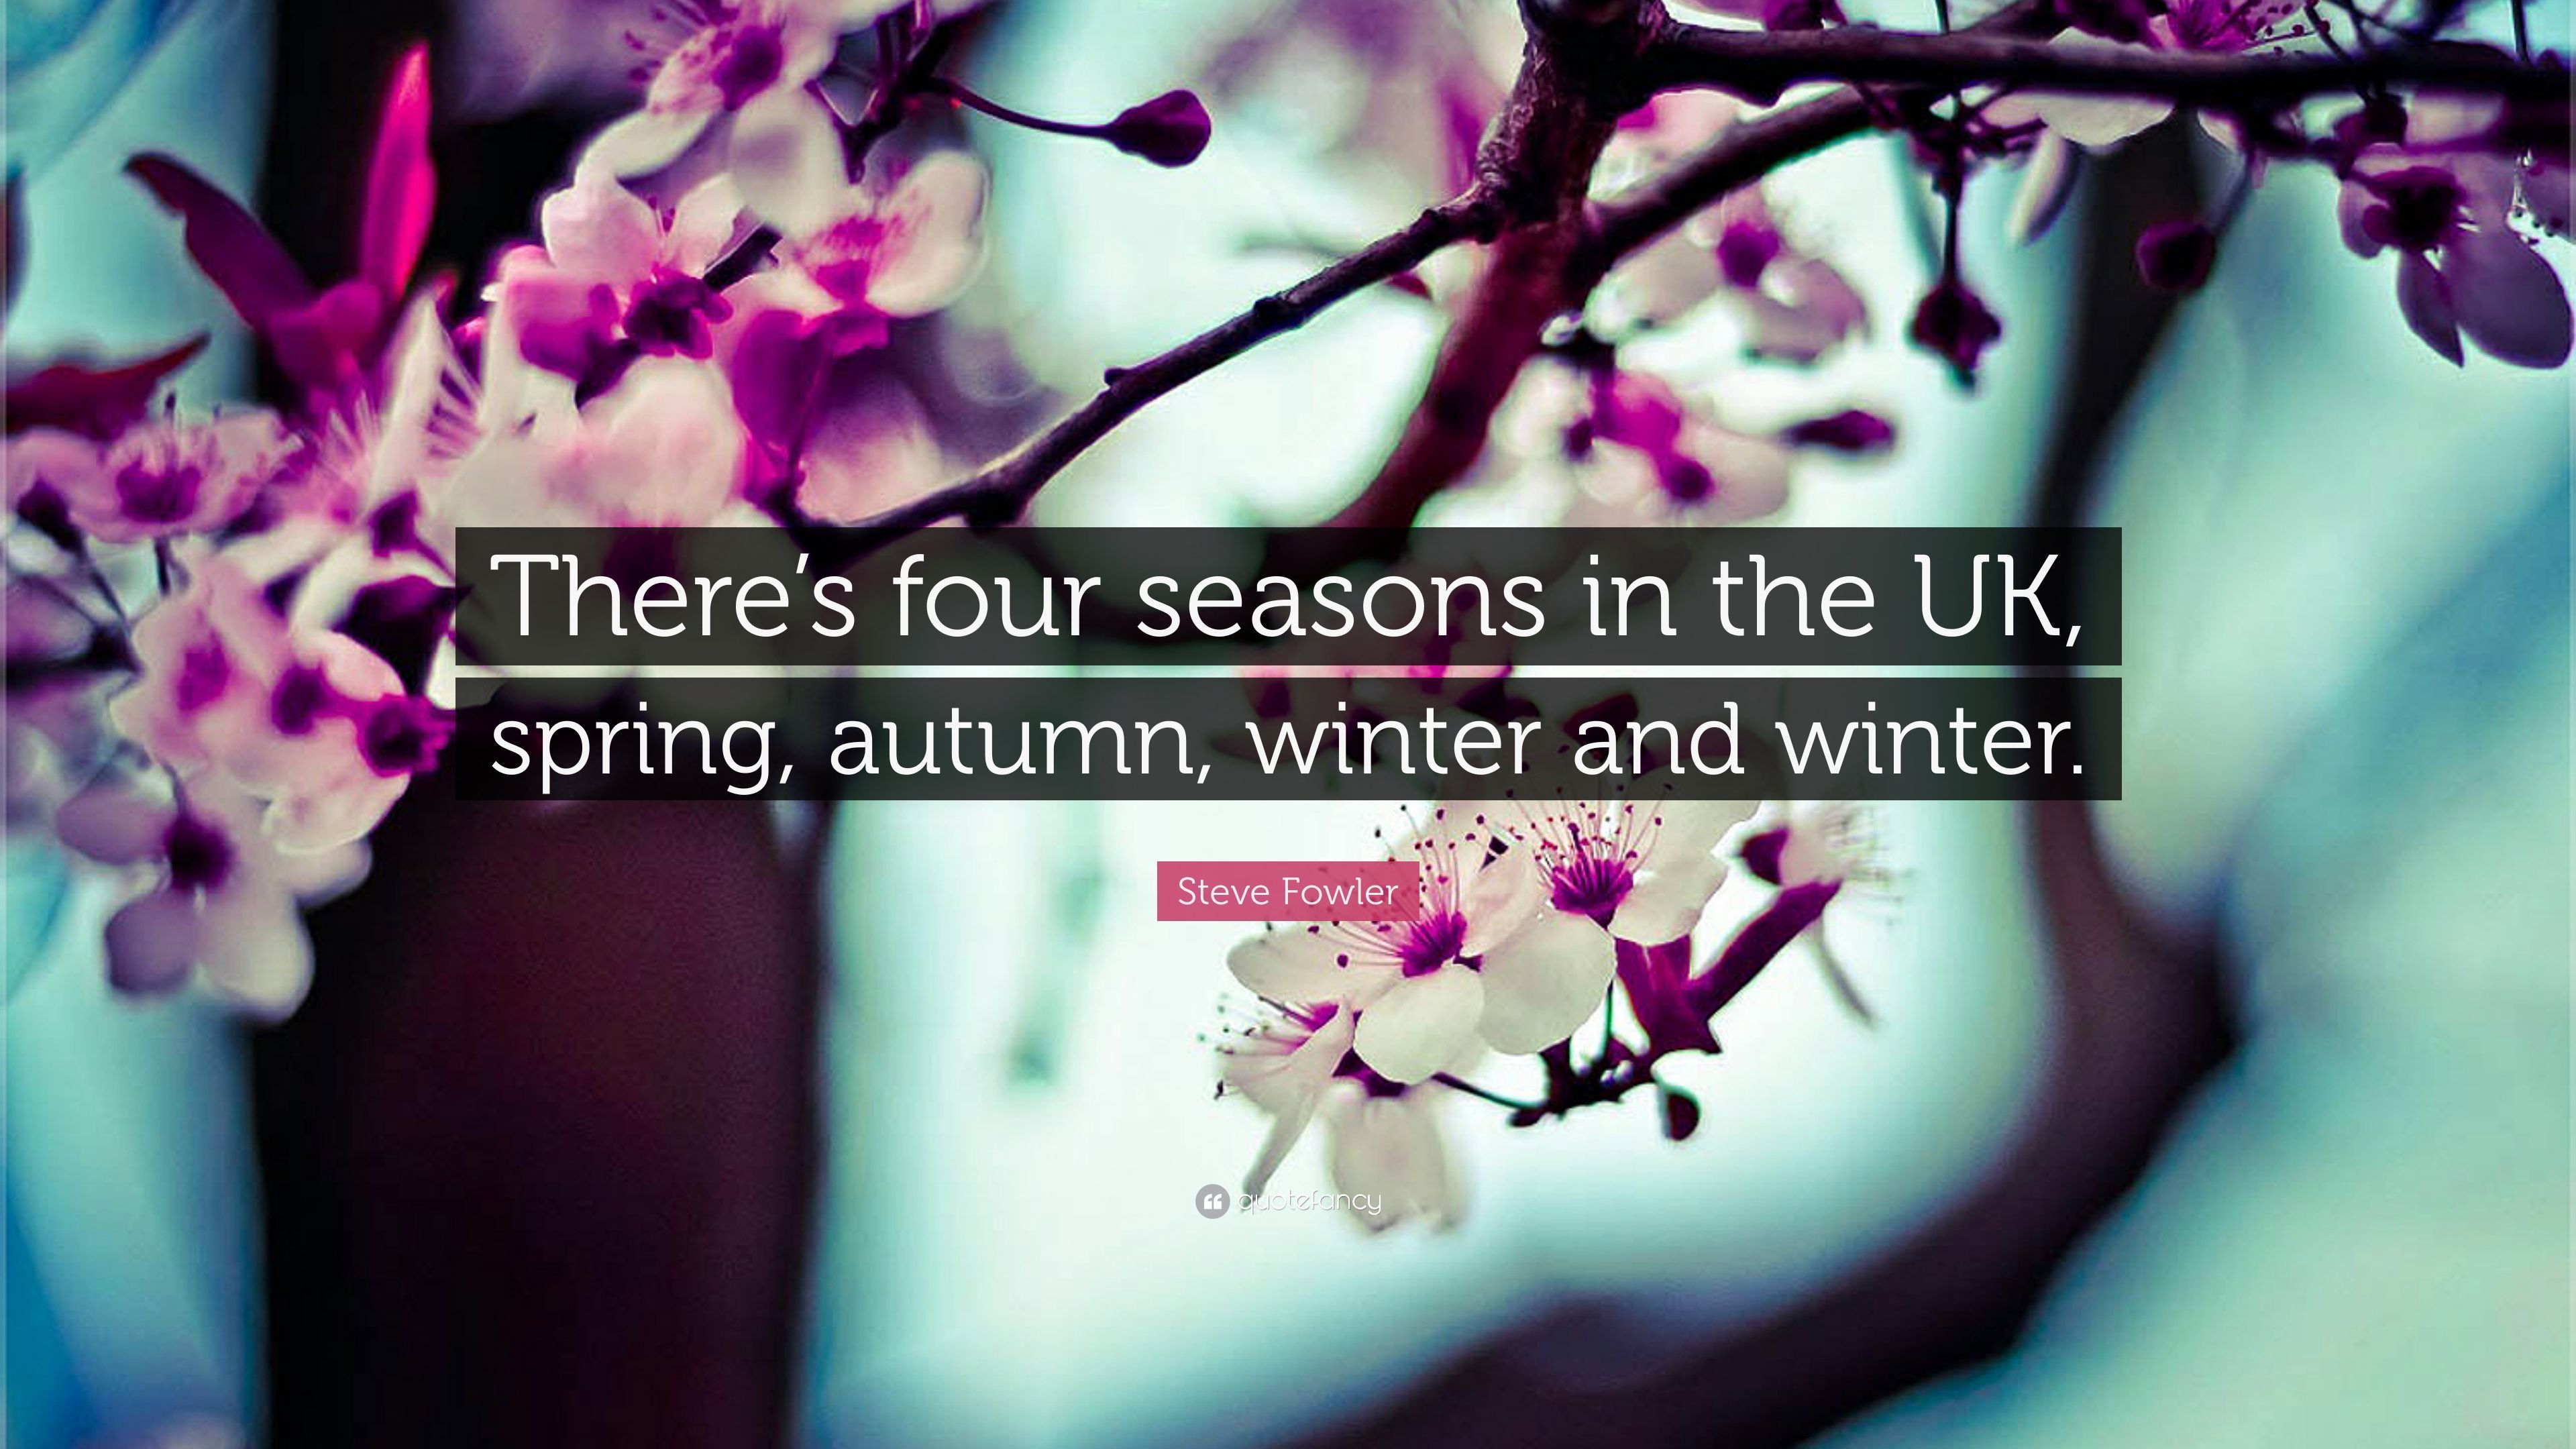 Steve Fowler Quote: “There's four seasons in the UK, spring